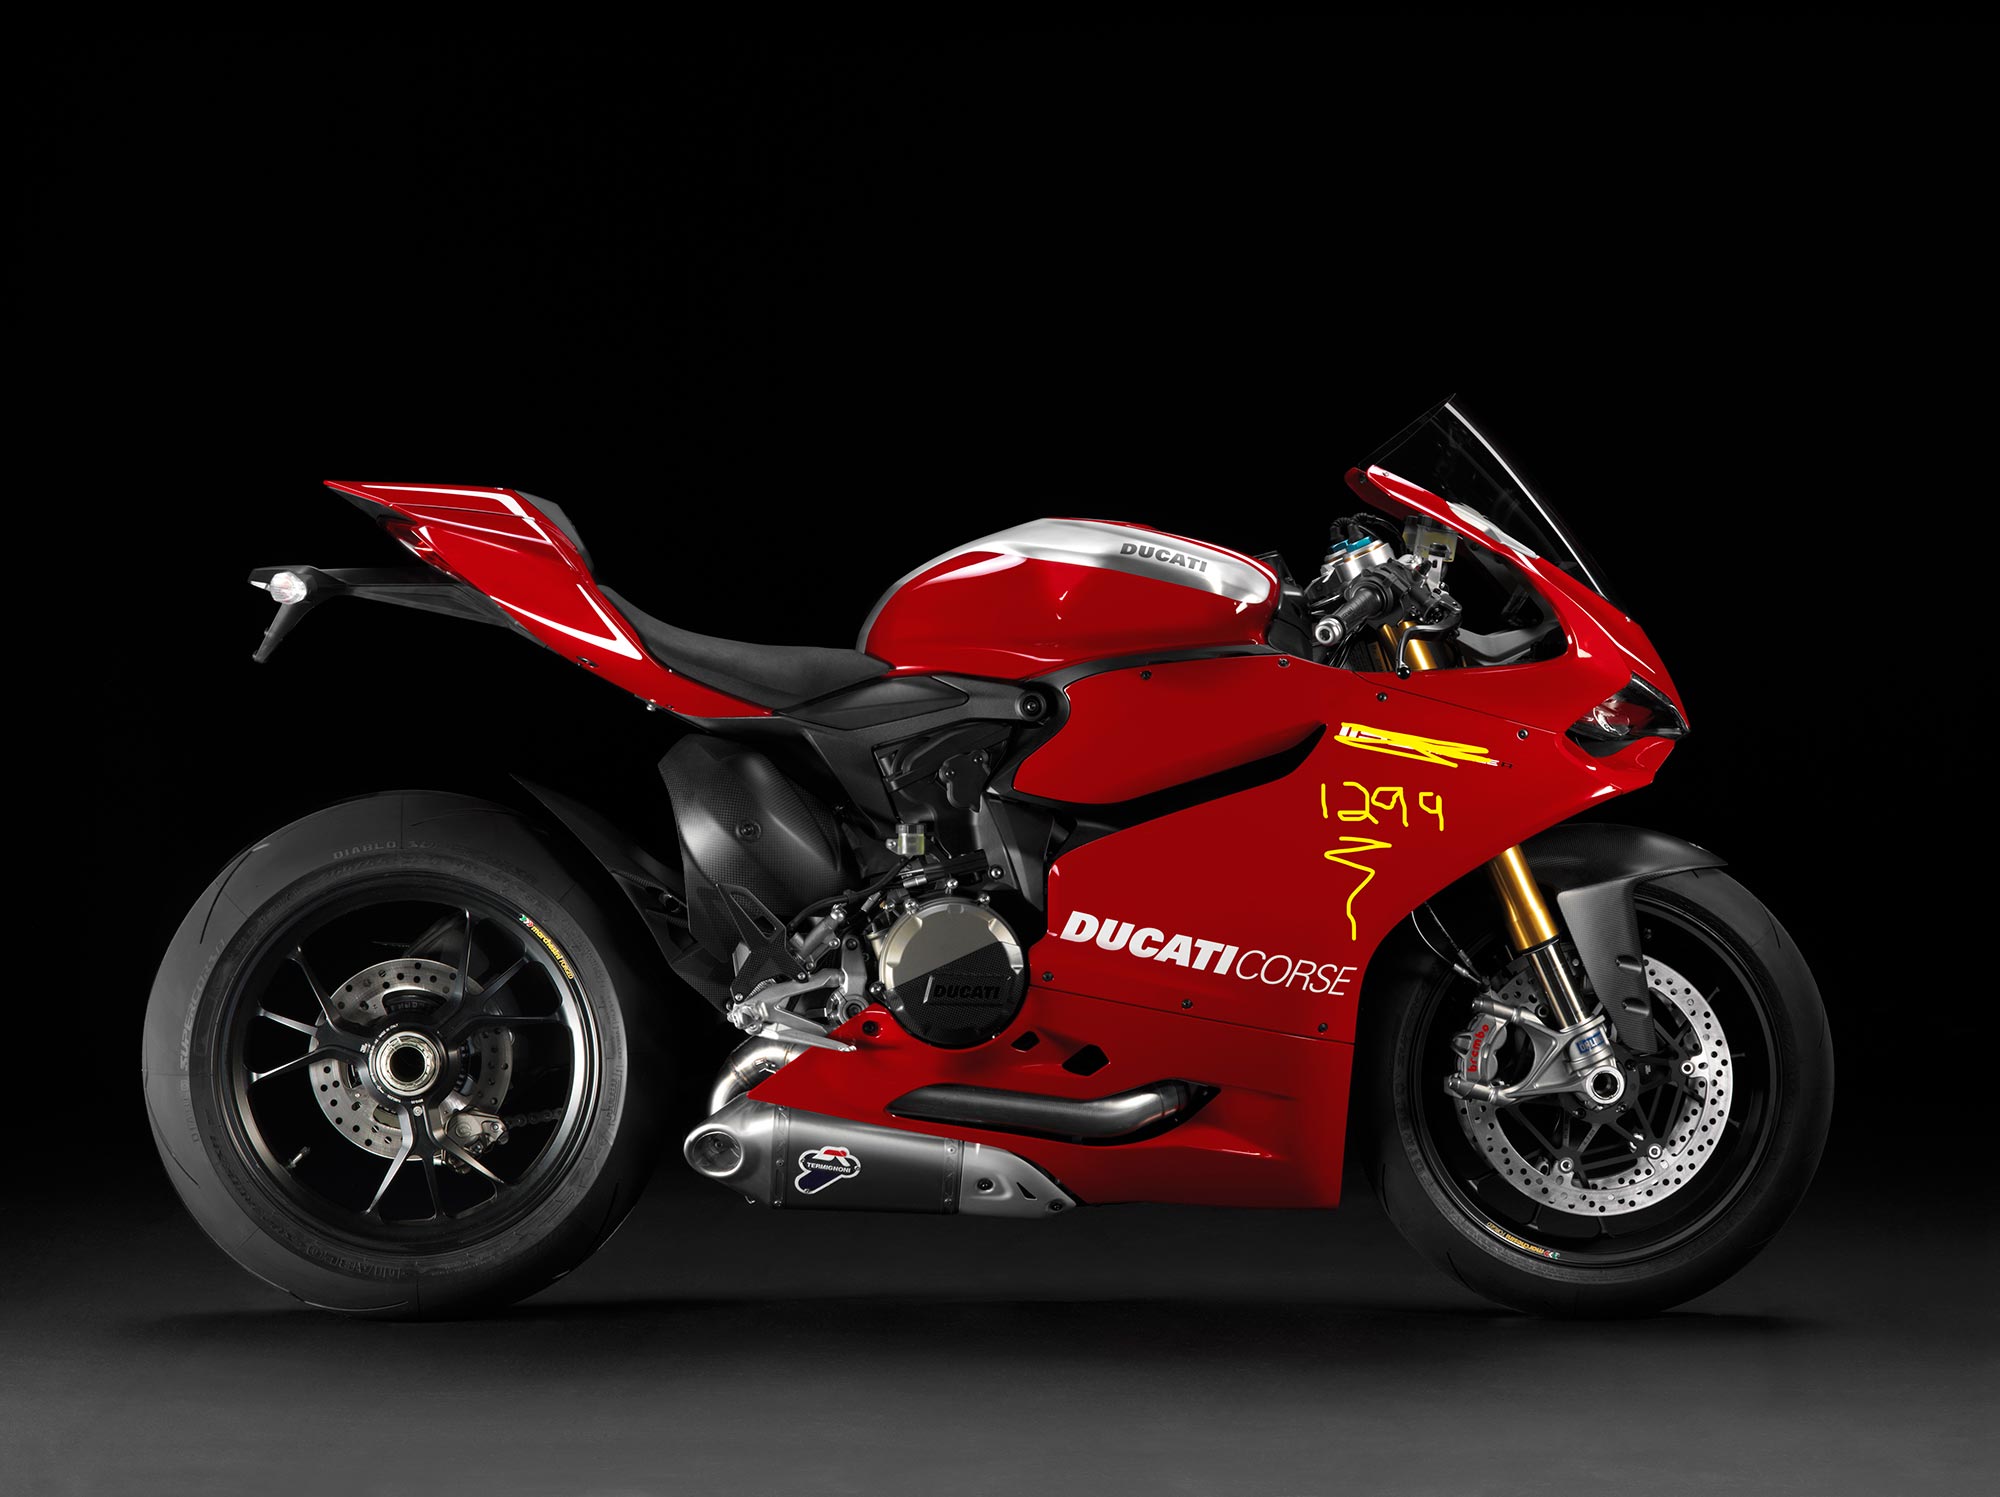 Ducati Owners: You Are Not Ready for the 1299 Superbike - Asphalt & Rubber